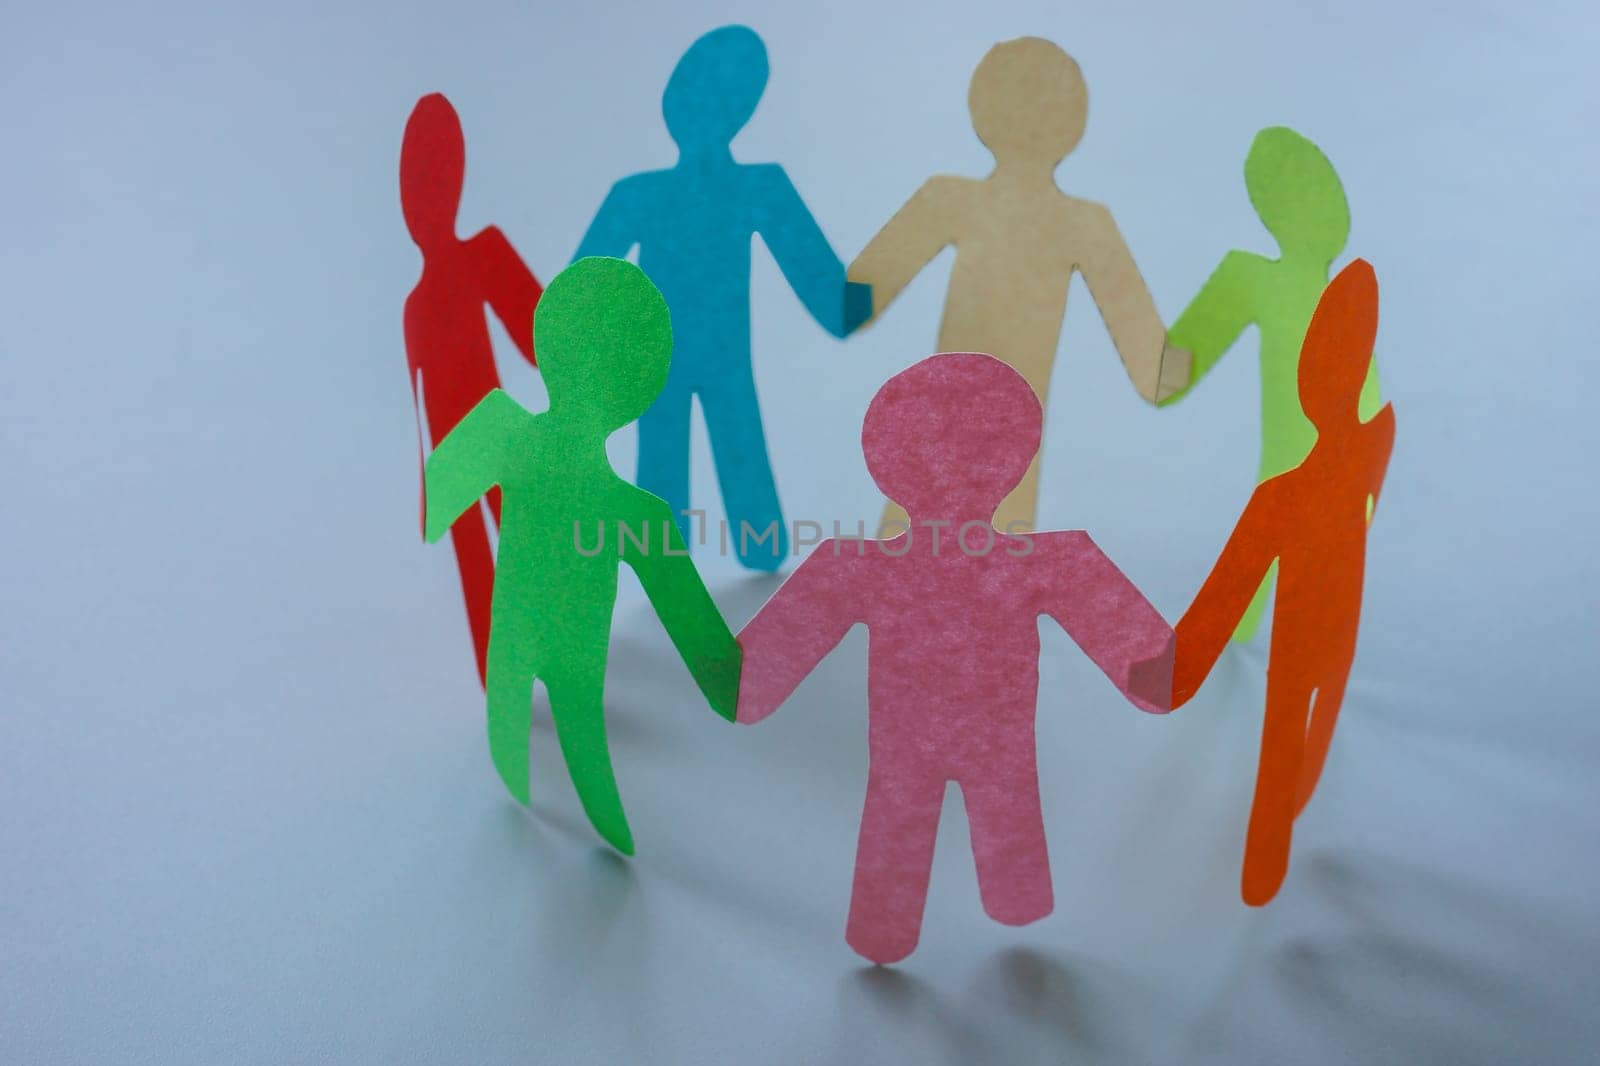 Circle of paper people. Concept of unity, diversity and teamwork.